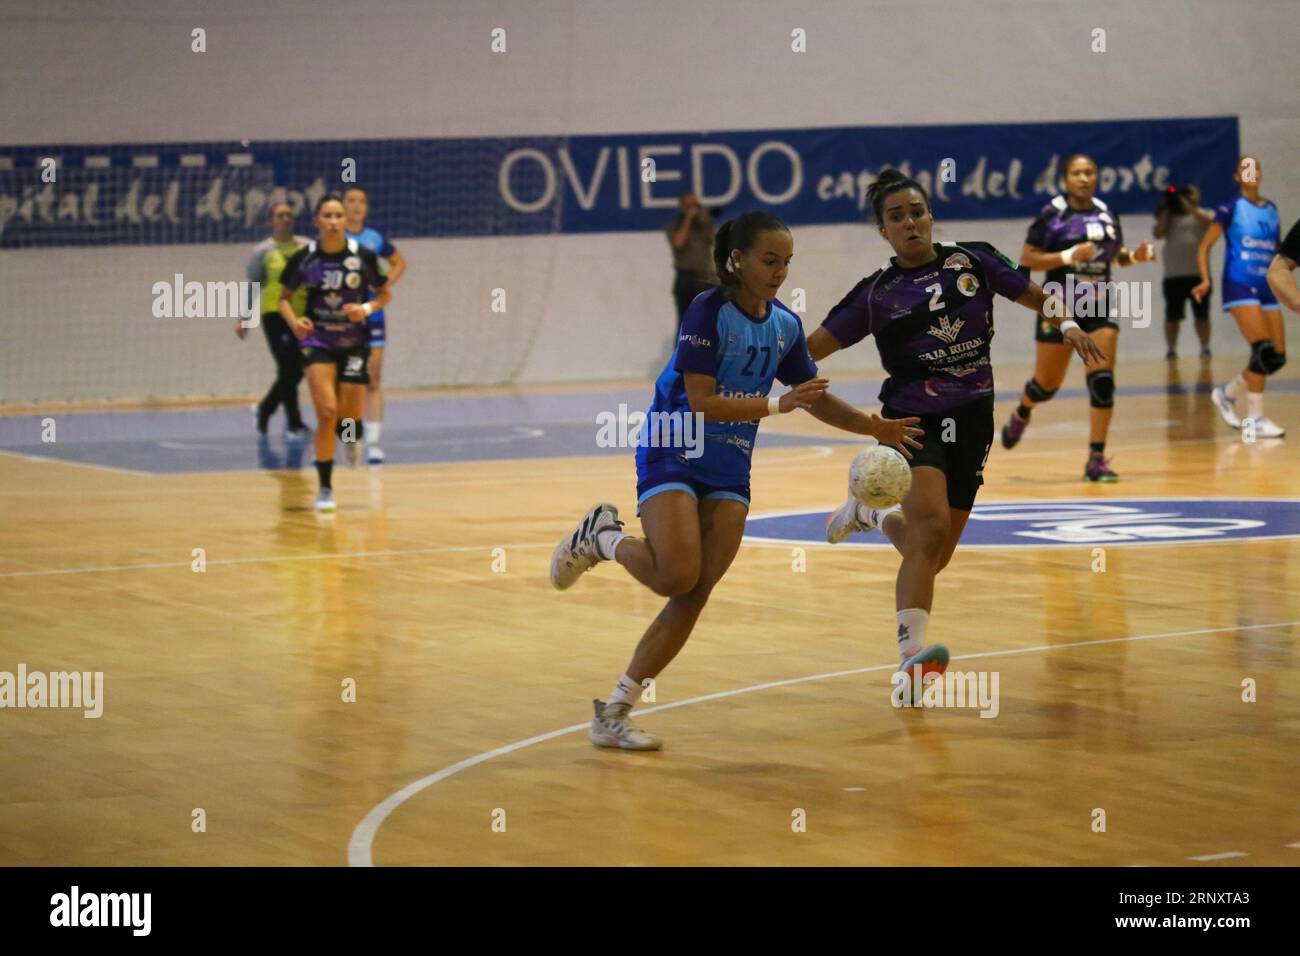 Oviedo, Spain. 02nd Sep, 2023. The player of Lobas Global Atac Oviedo, Jimena Merino (27, L) tries to shoot on goal against Elba Alvarez (2, R) during the first day of the Liga Guerreras Iberdrola between Lobas Global Atac Oviedo and the Caja Rural Aula Valladolid, on September 2, 2023, at the Florida Arena Municipal Sports Center, in Oviedo, Spain. (Photo by Alberto Brevers/Pacific Press) Credit: Pacific Press Media Production Corp./Alamy Live News Stock Photo